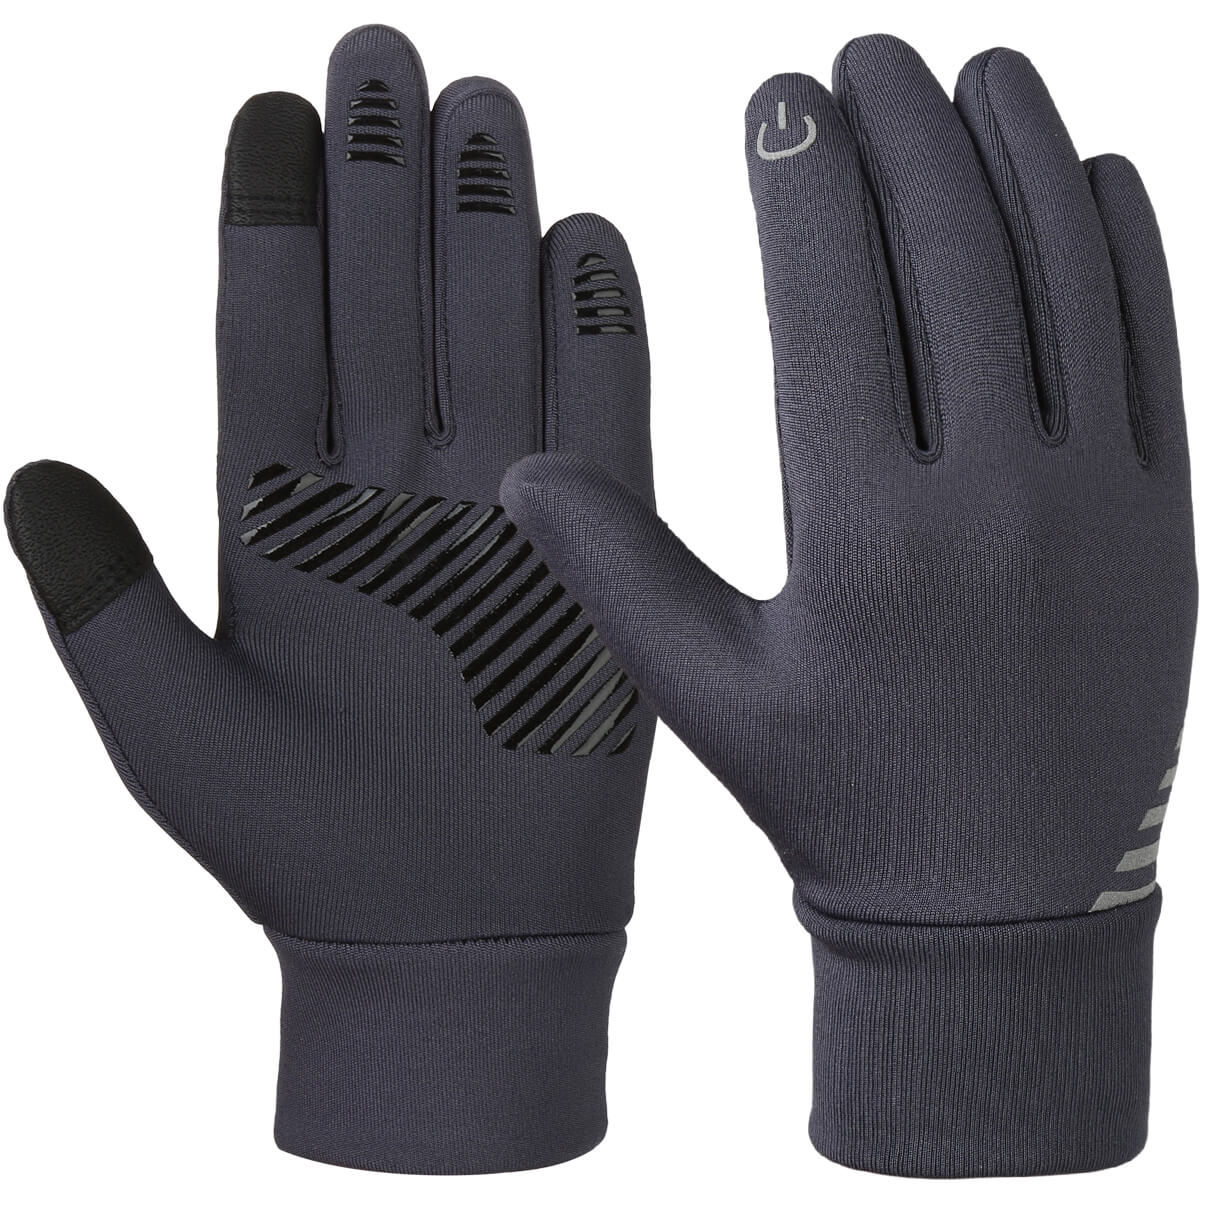 Types of Winter Gloves